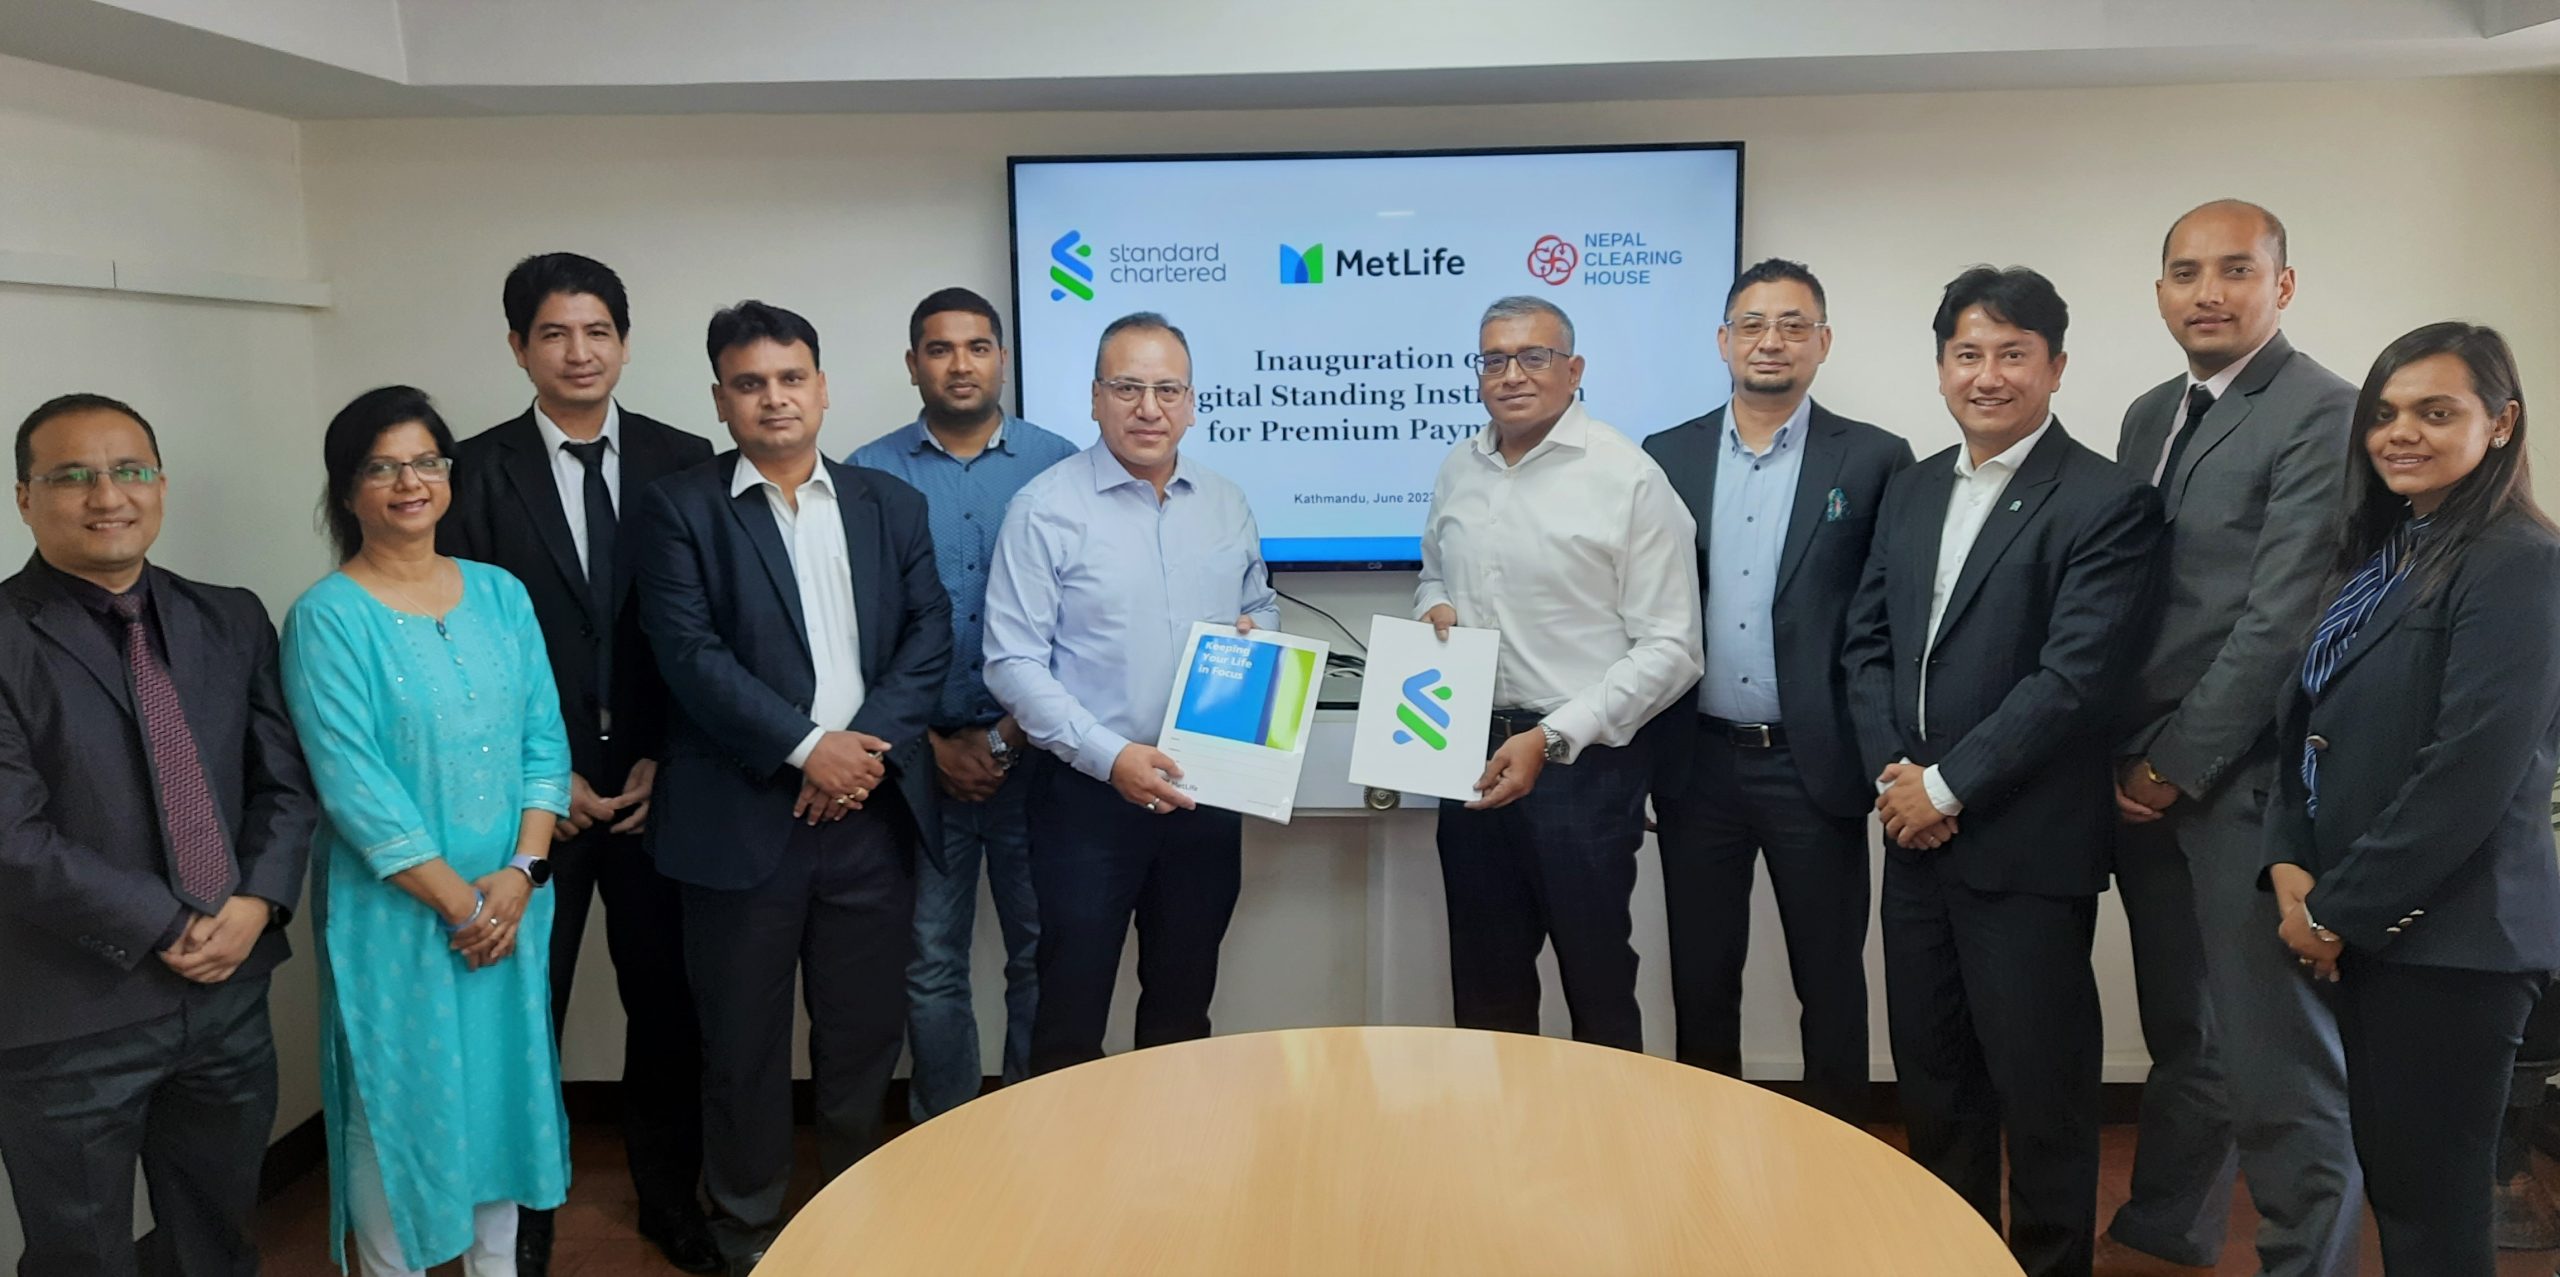 Inauguration of Digital Standing Instructions by MetLife Nepal and Standard Chartered Bank for premium payments collection